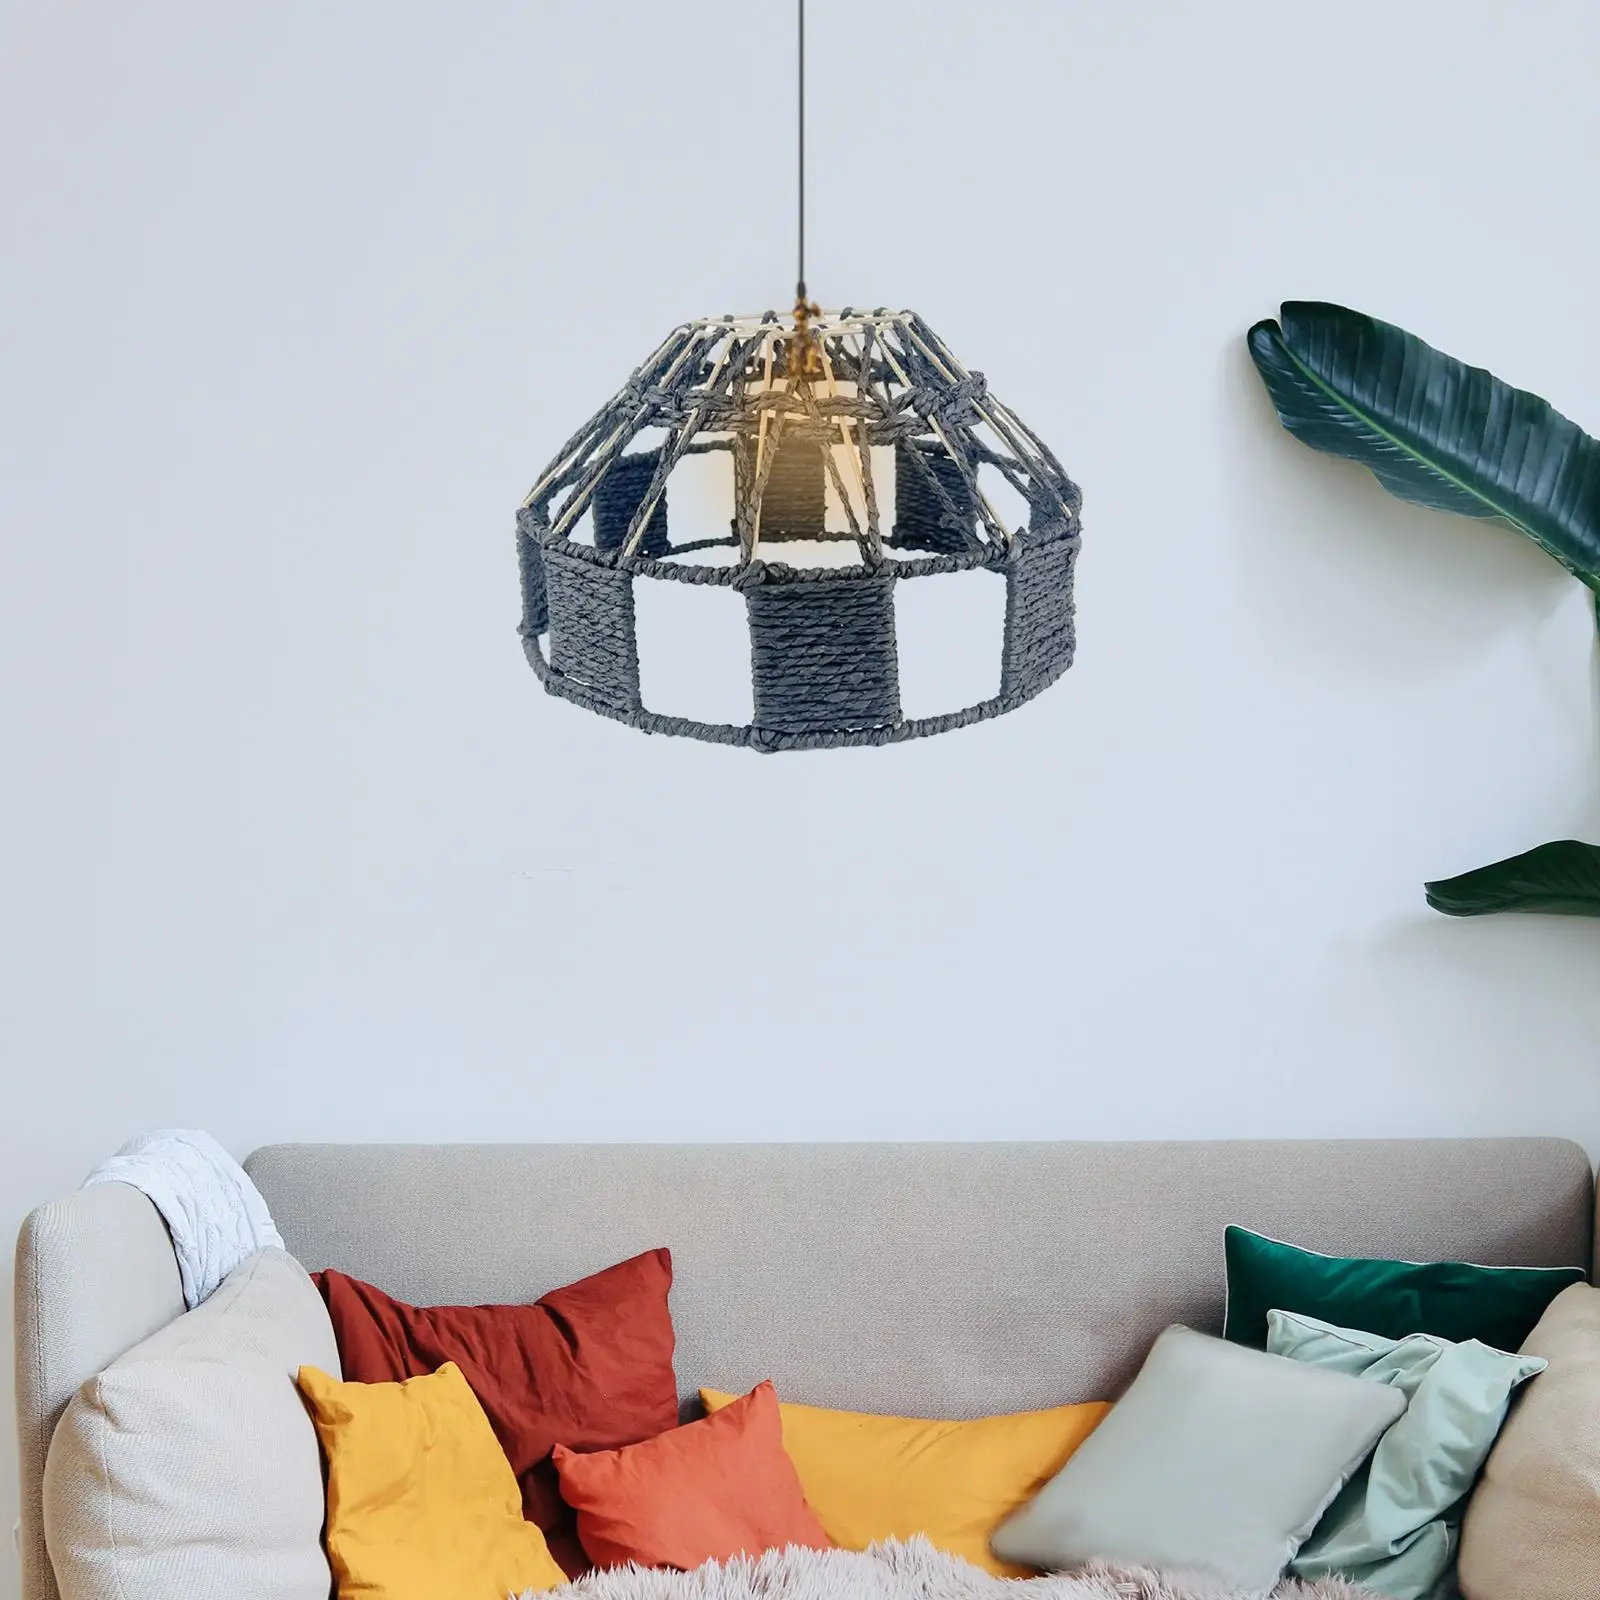 Nordic Style Pendant Lamp Shade Ceiling Light Shade Paper Rope Decoration Woven Lampshade for Teahouse Living Room Bedroom Hotel